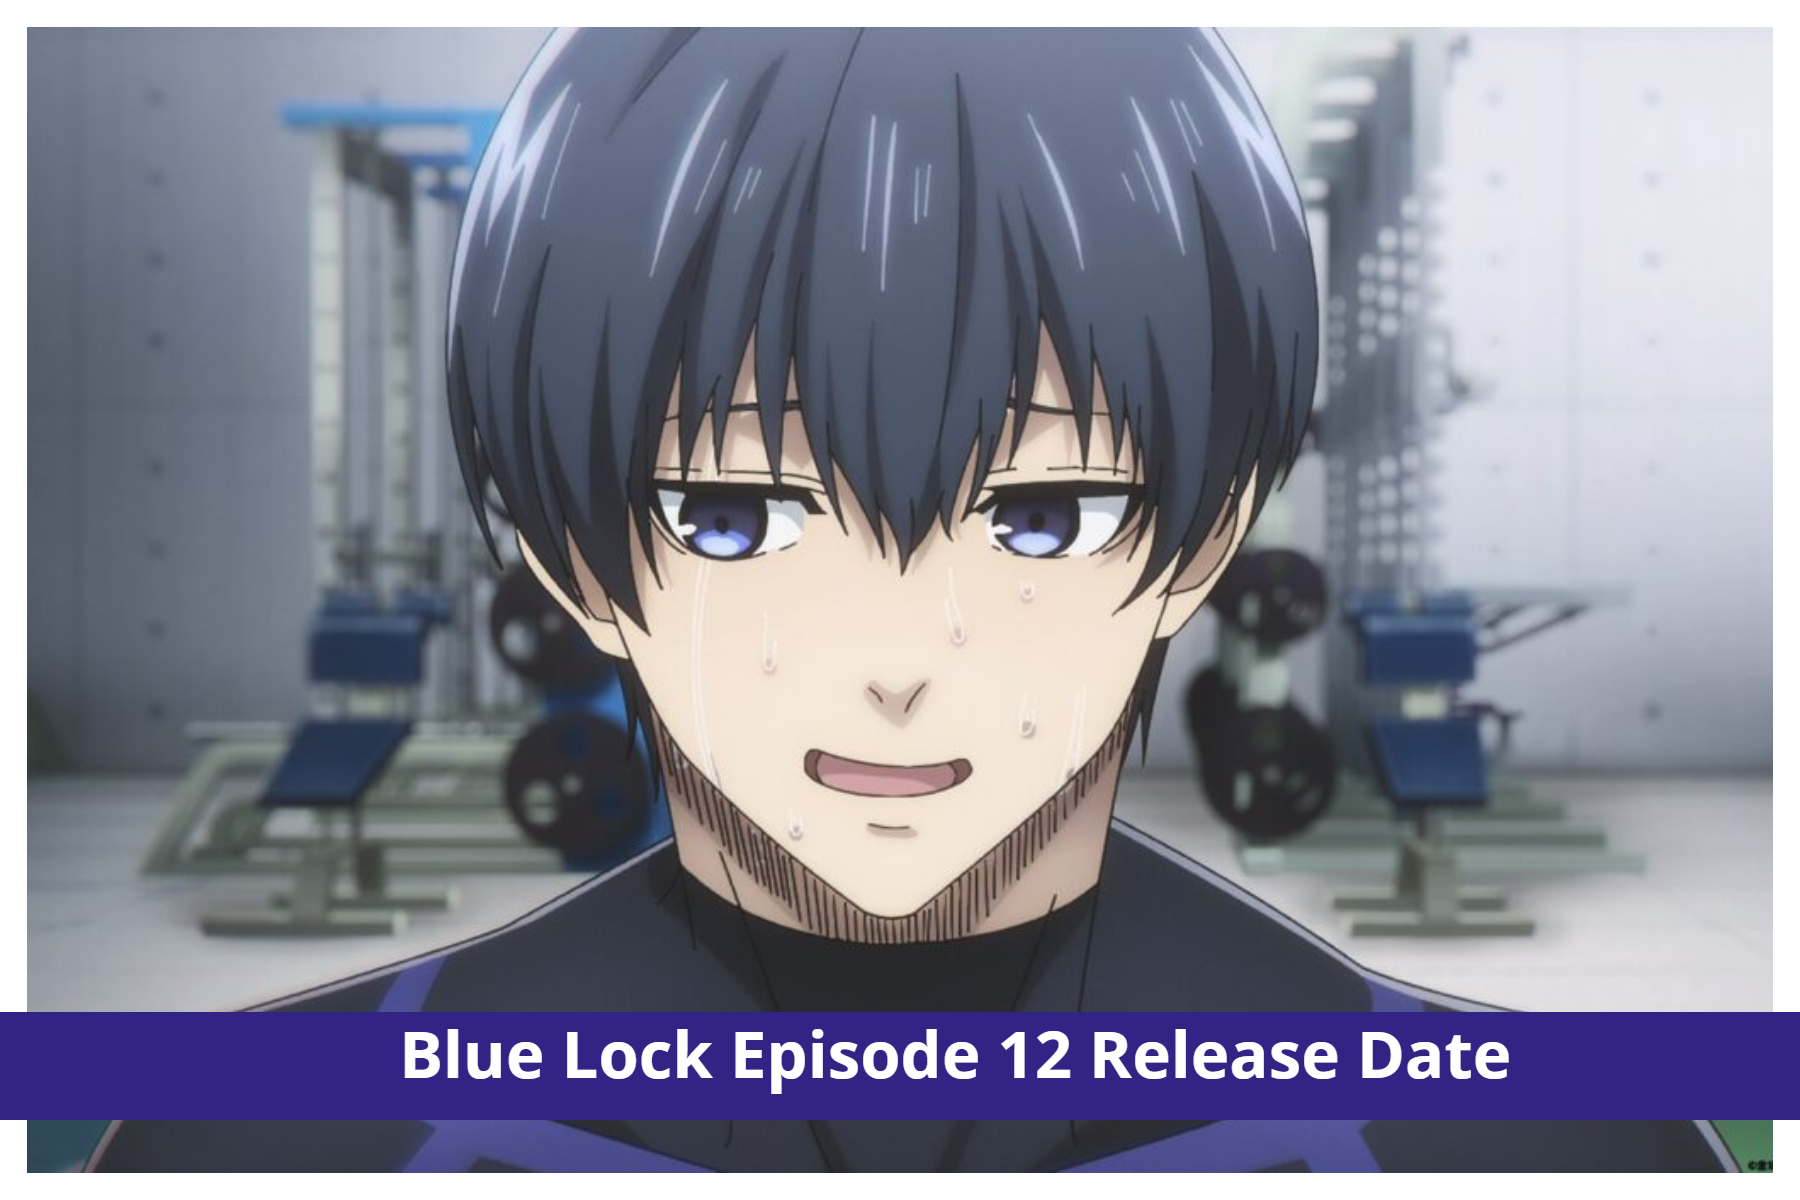 Blue Lock Episode 12 Preview Images Revealed